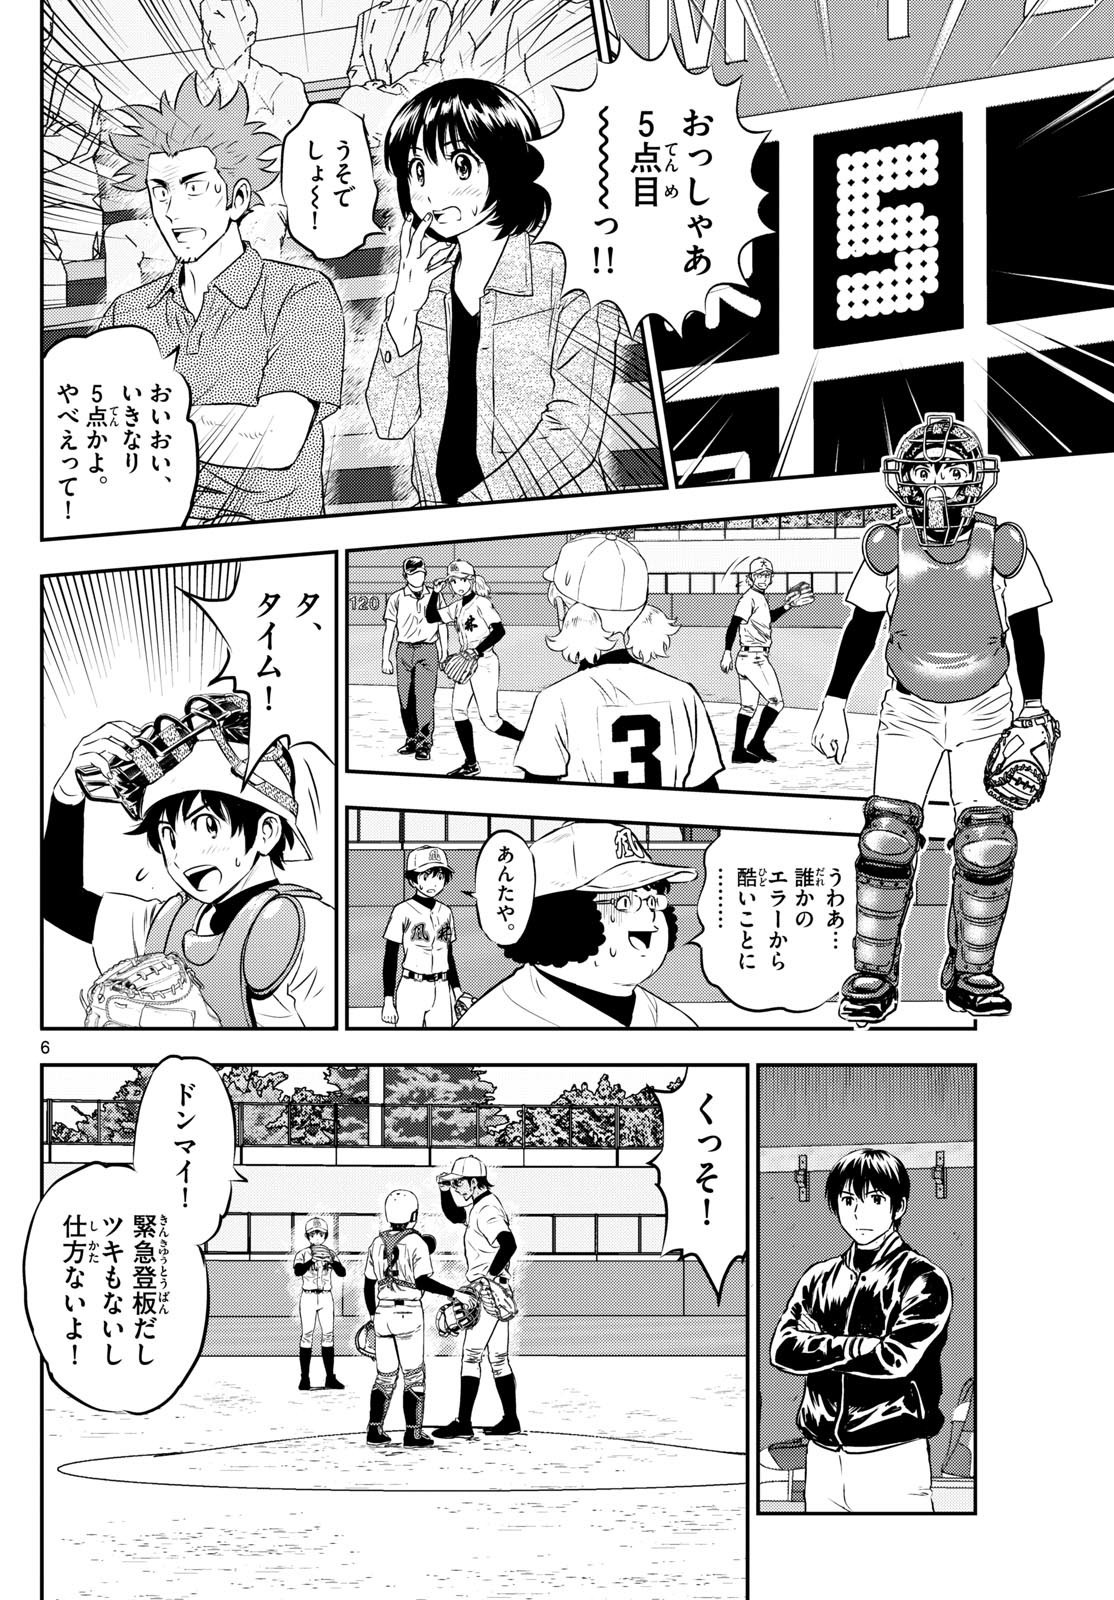 Major 2nd - メジャーセカンド - Chapter 284 - Page 6